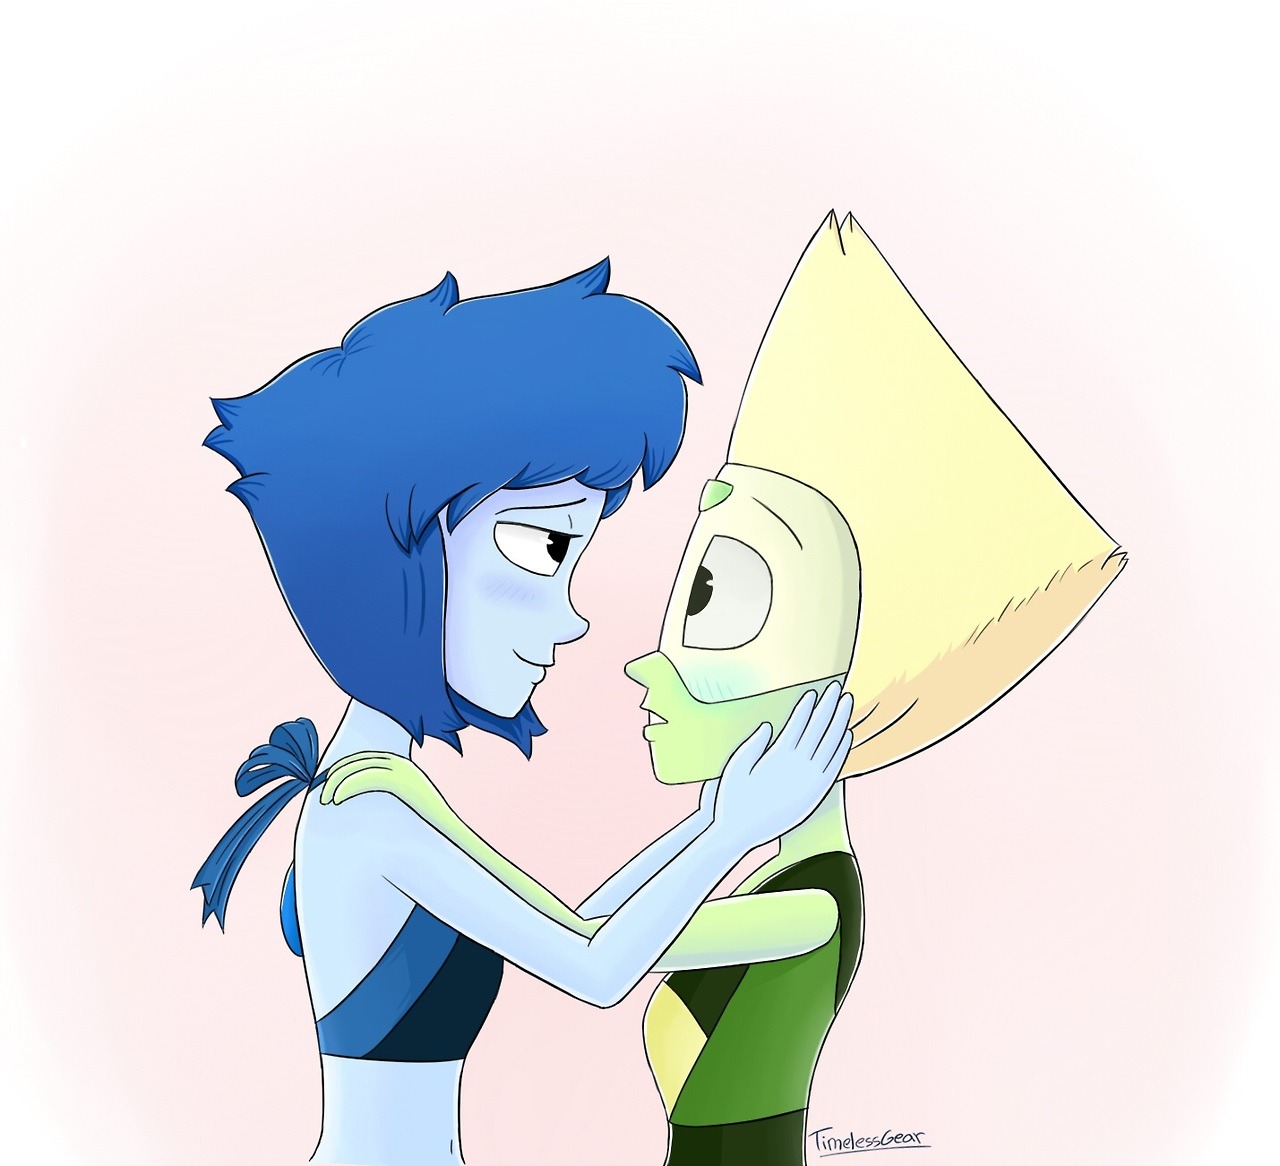 I think I’ll post some Lapdiot stuff, it’s one of my favorite ships and just really like it, hope you like this one.